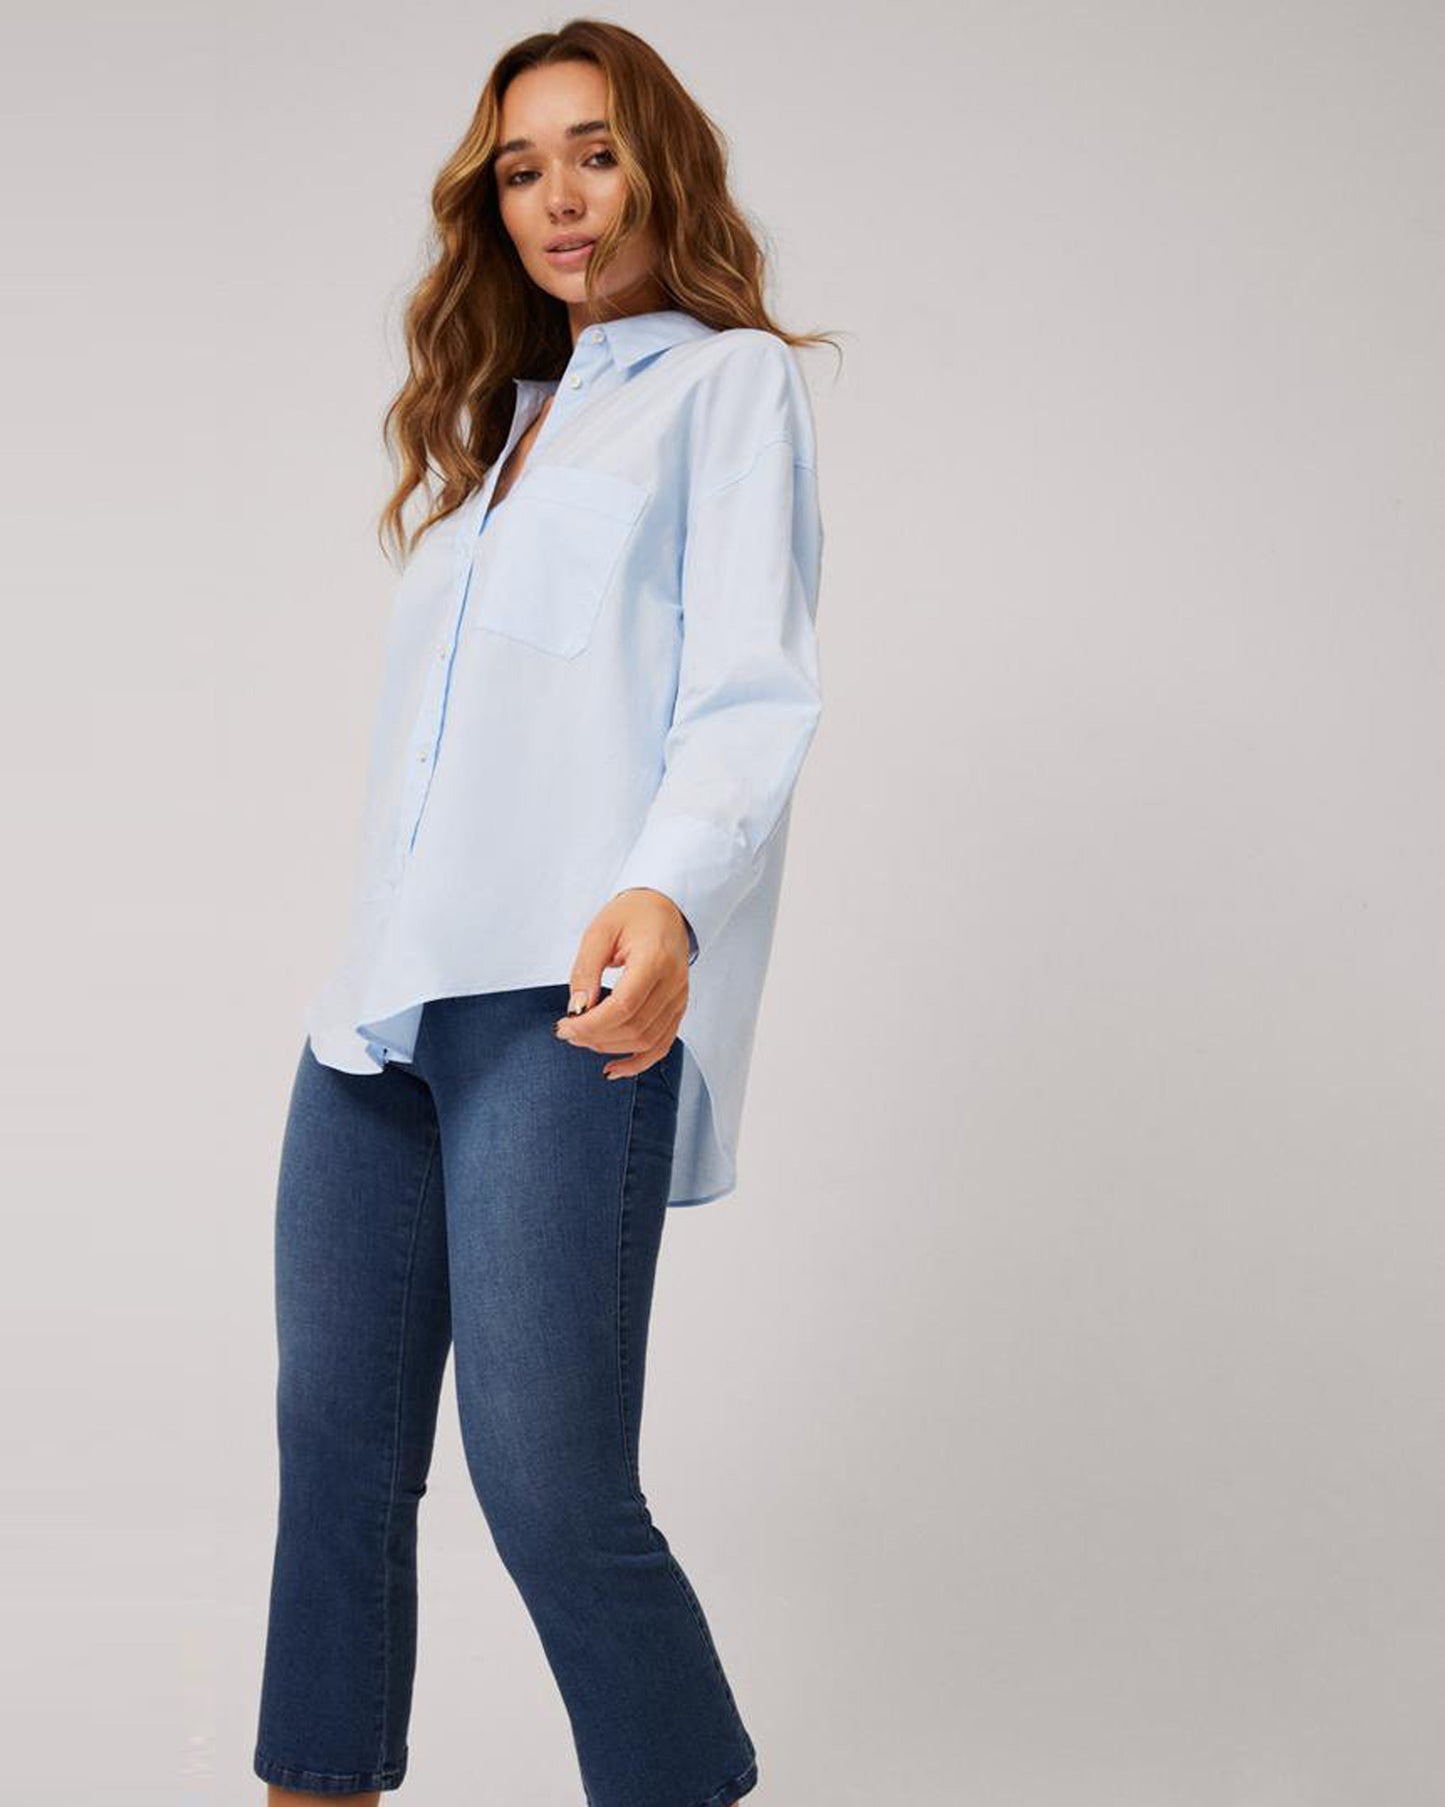 Ysabel Mora 70411 Cropped Flare Jeggings - Dark denim blue stretch high rise leggings with a flared boot leg, back pockets, belt loops and faux front pockets and fly top stitching.